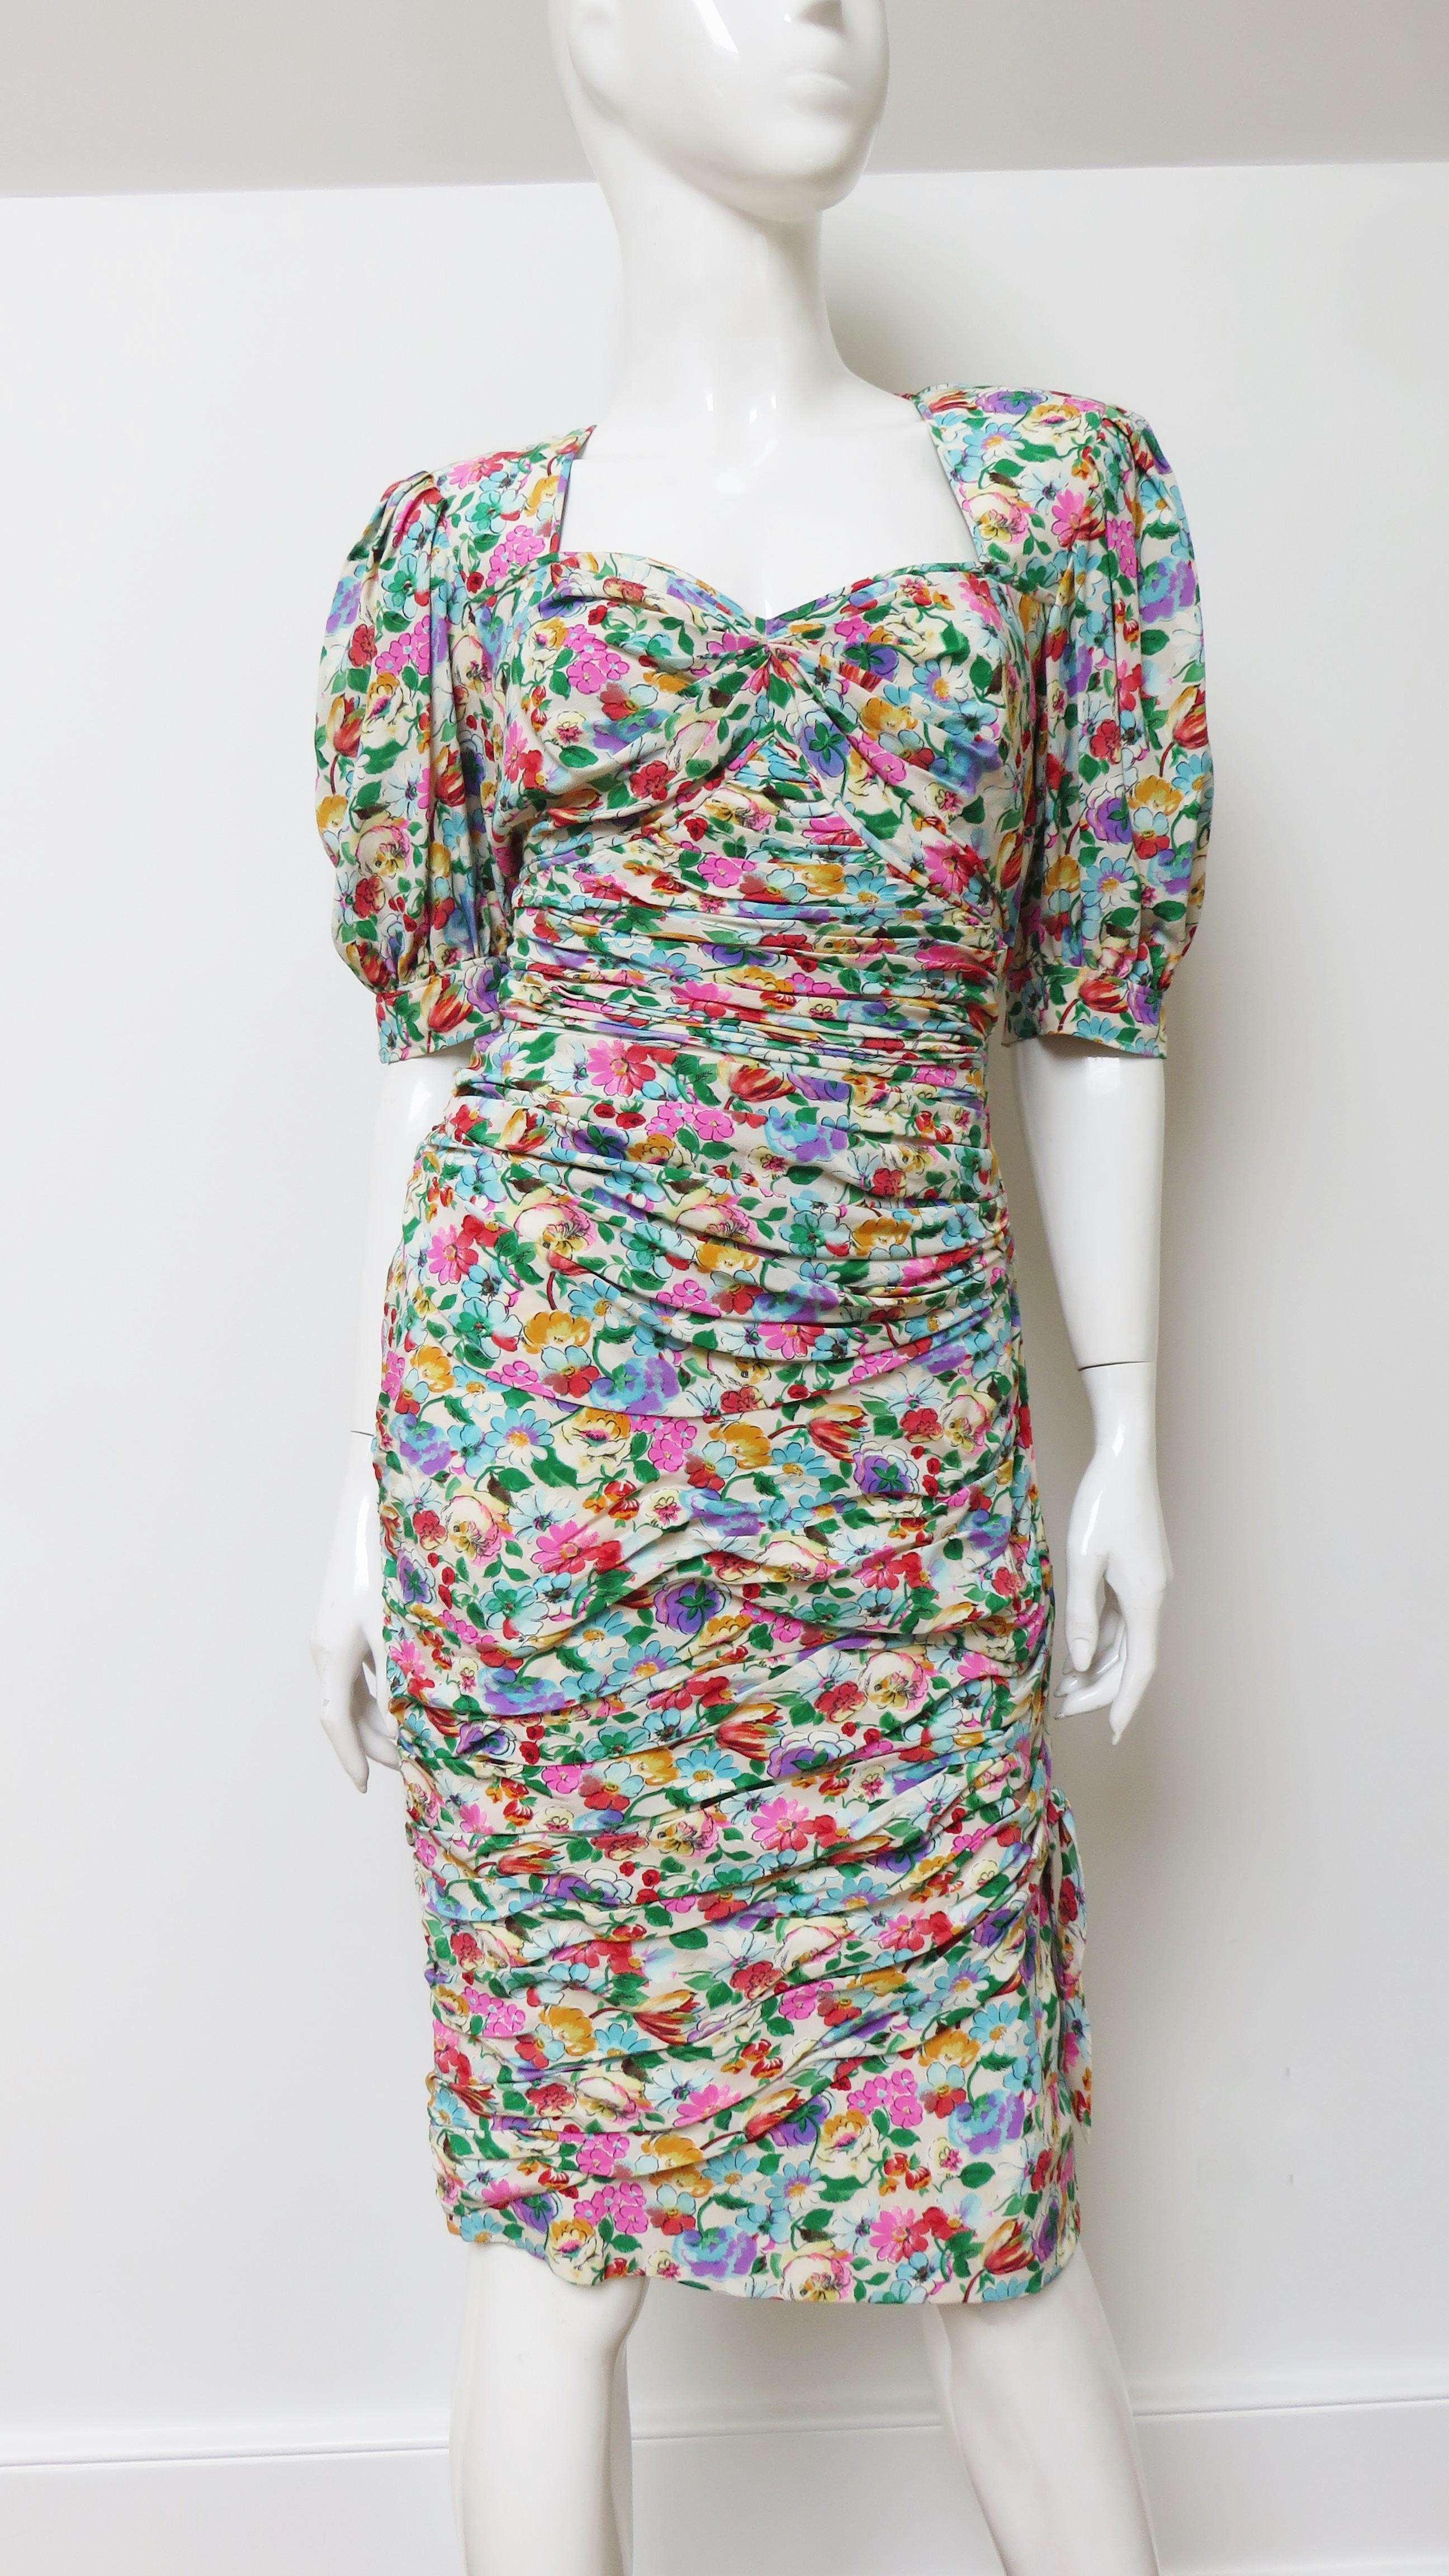 A very pretty flower pattern silk dress from Emanuel Ungaro in pinks, blues, greens and golds on an off white background. It has a sweetheart neckline, elbow length puffed sleeves with ties and is horizontally ruched front and back through to the